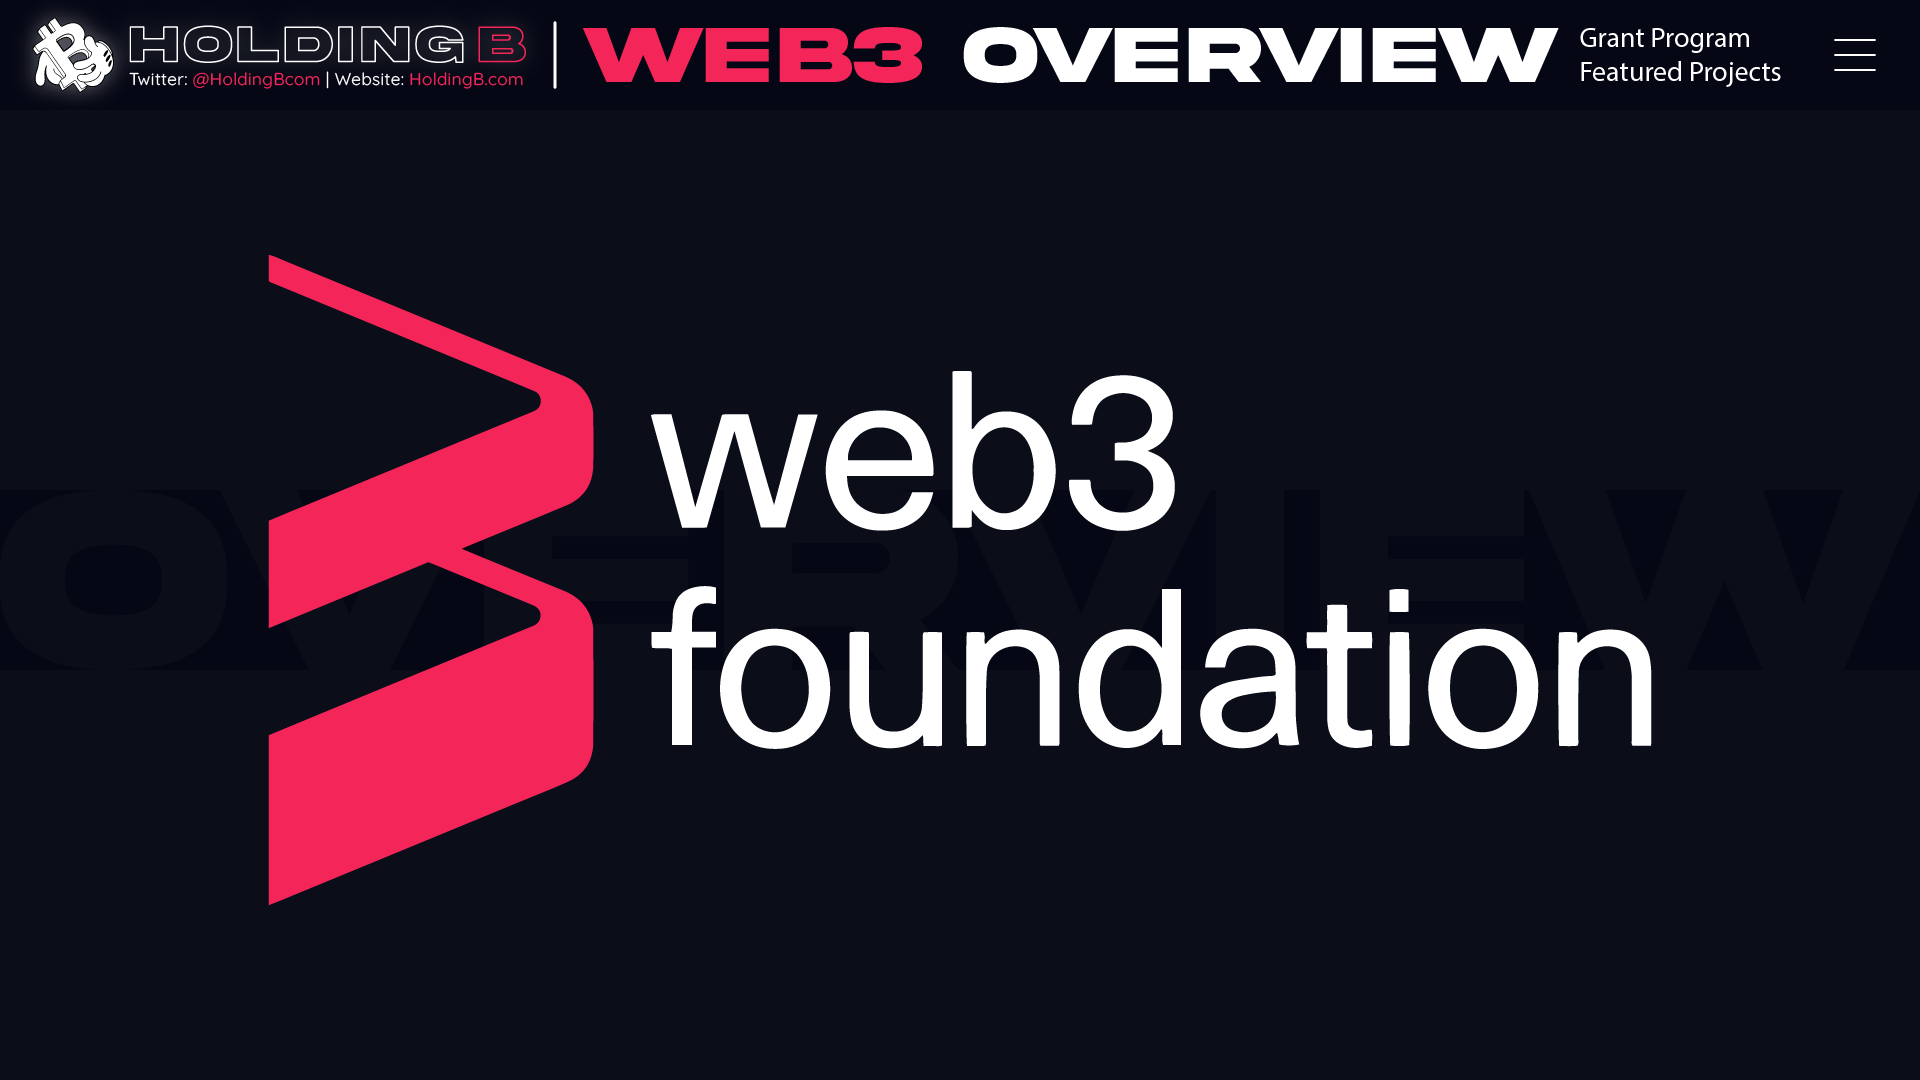 Web3 Foundation’s grant program and featured projects